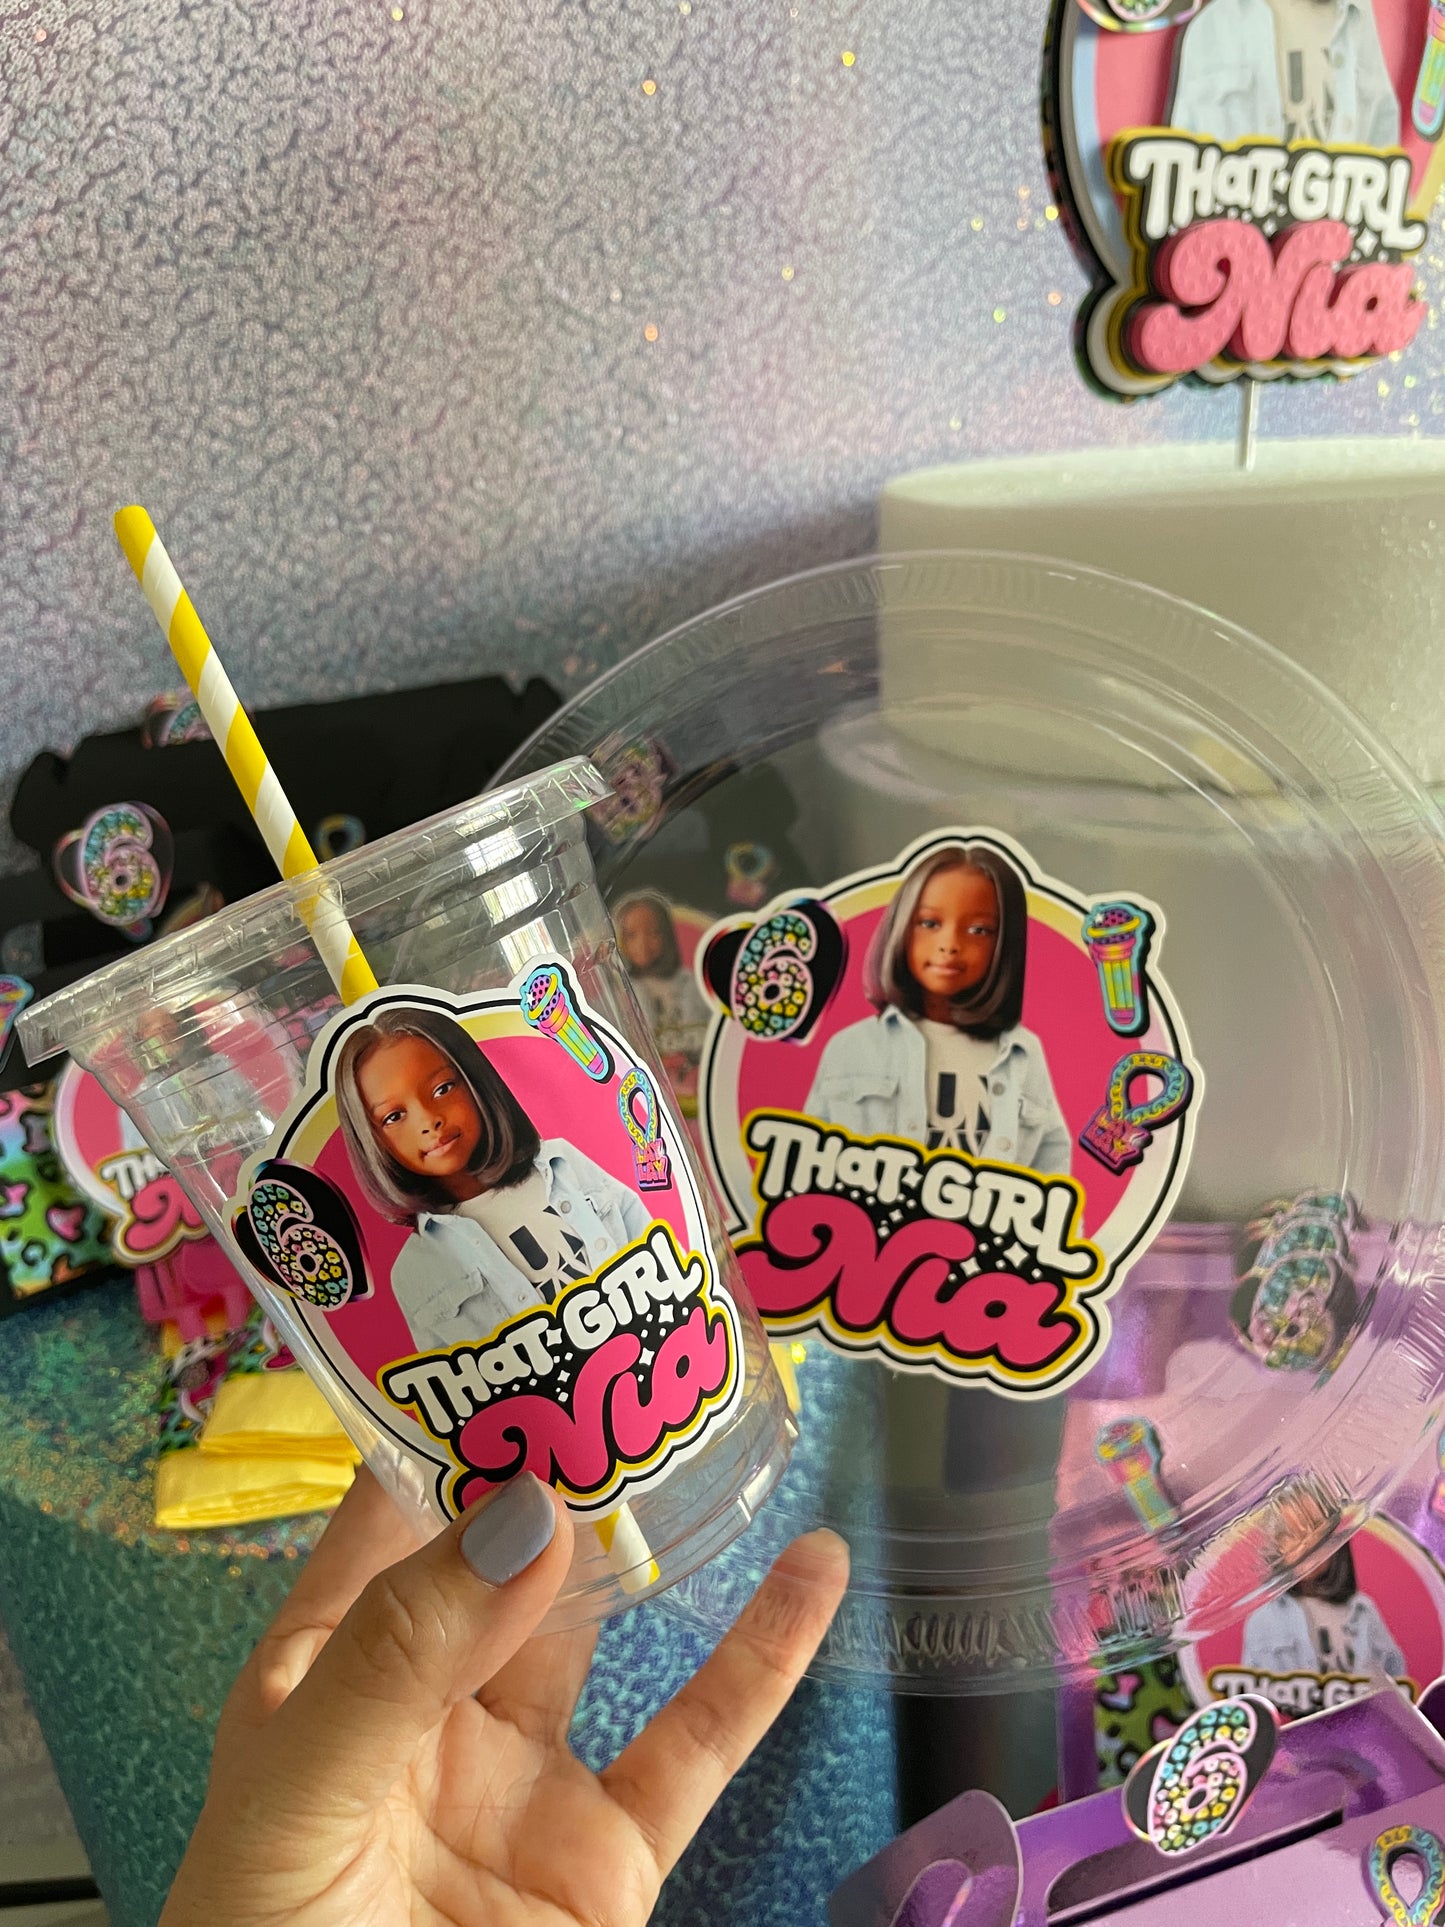 Party Supplies That Girl Lay Lay